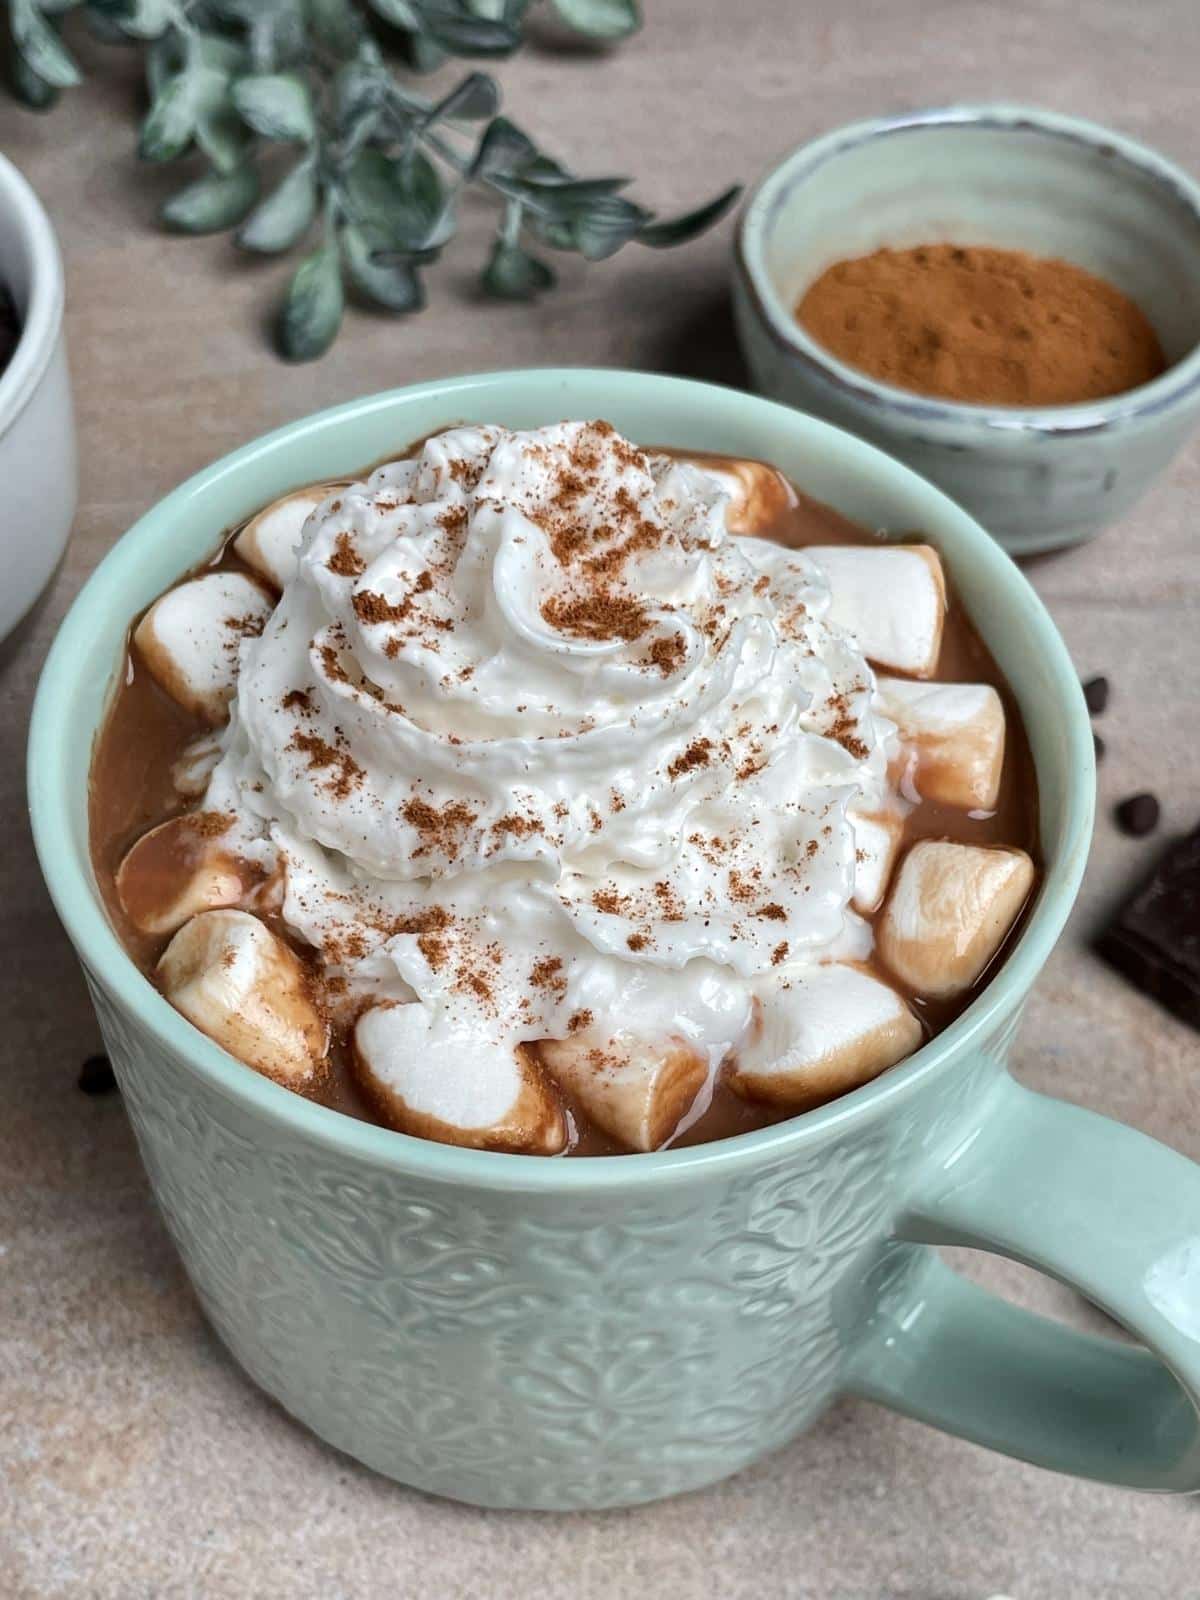 Hot chocolate with toppings.